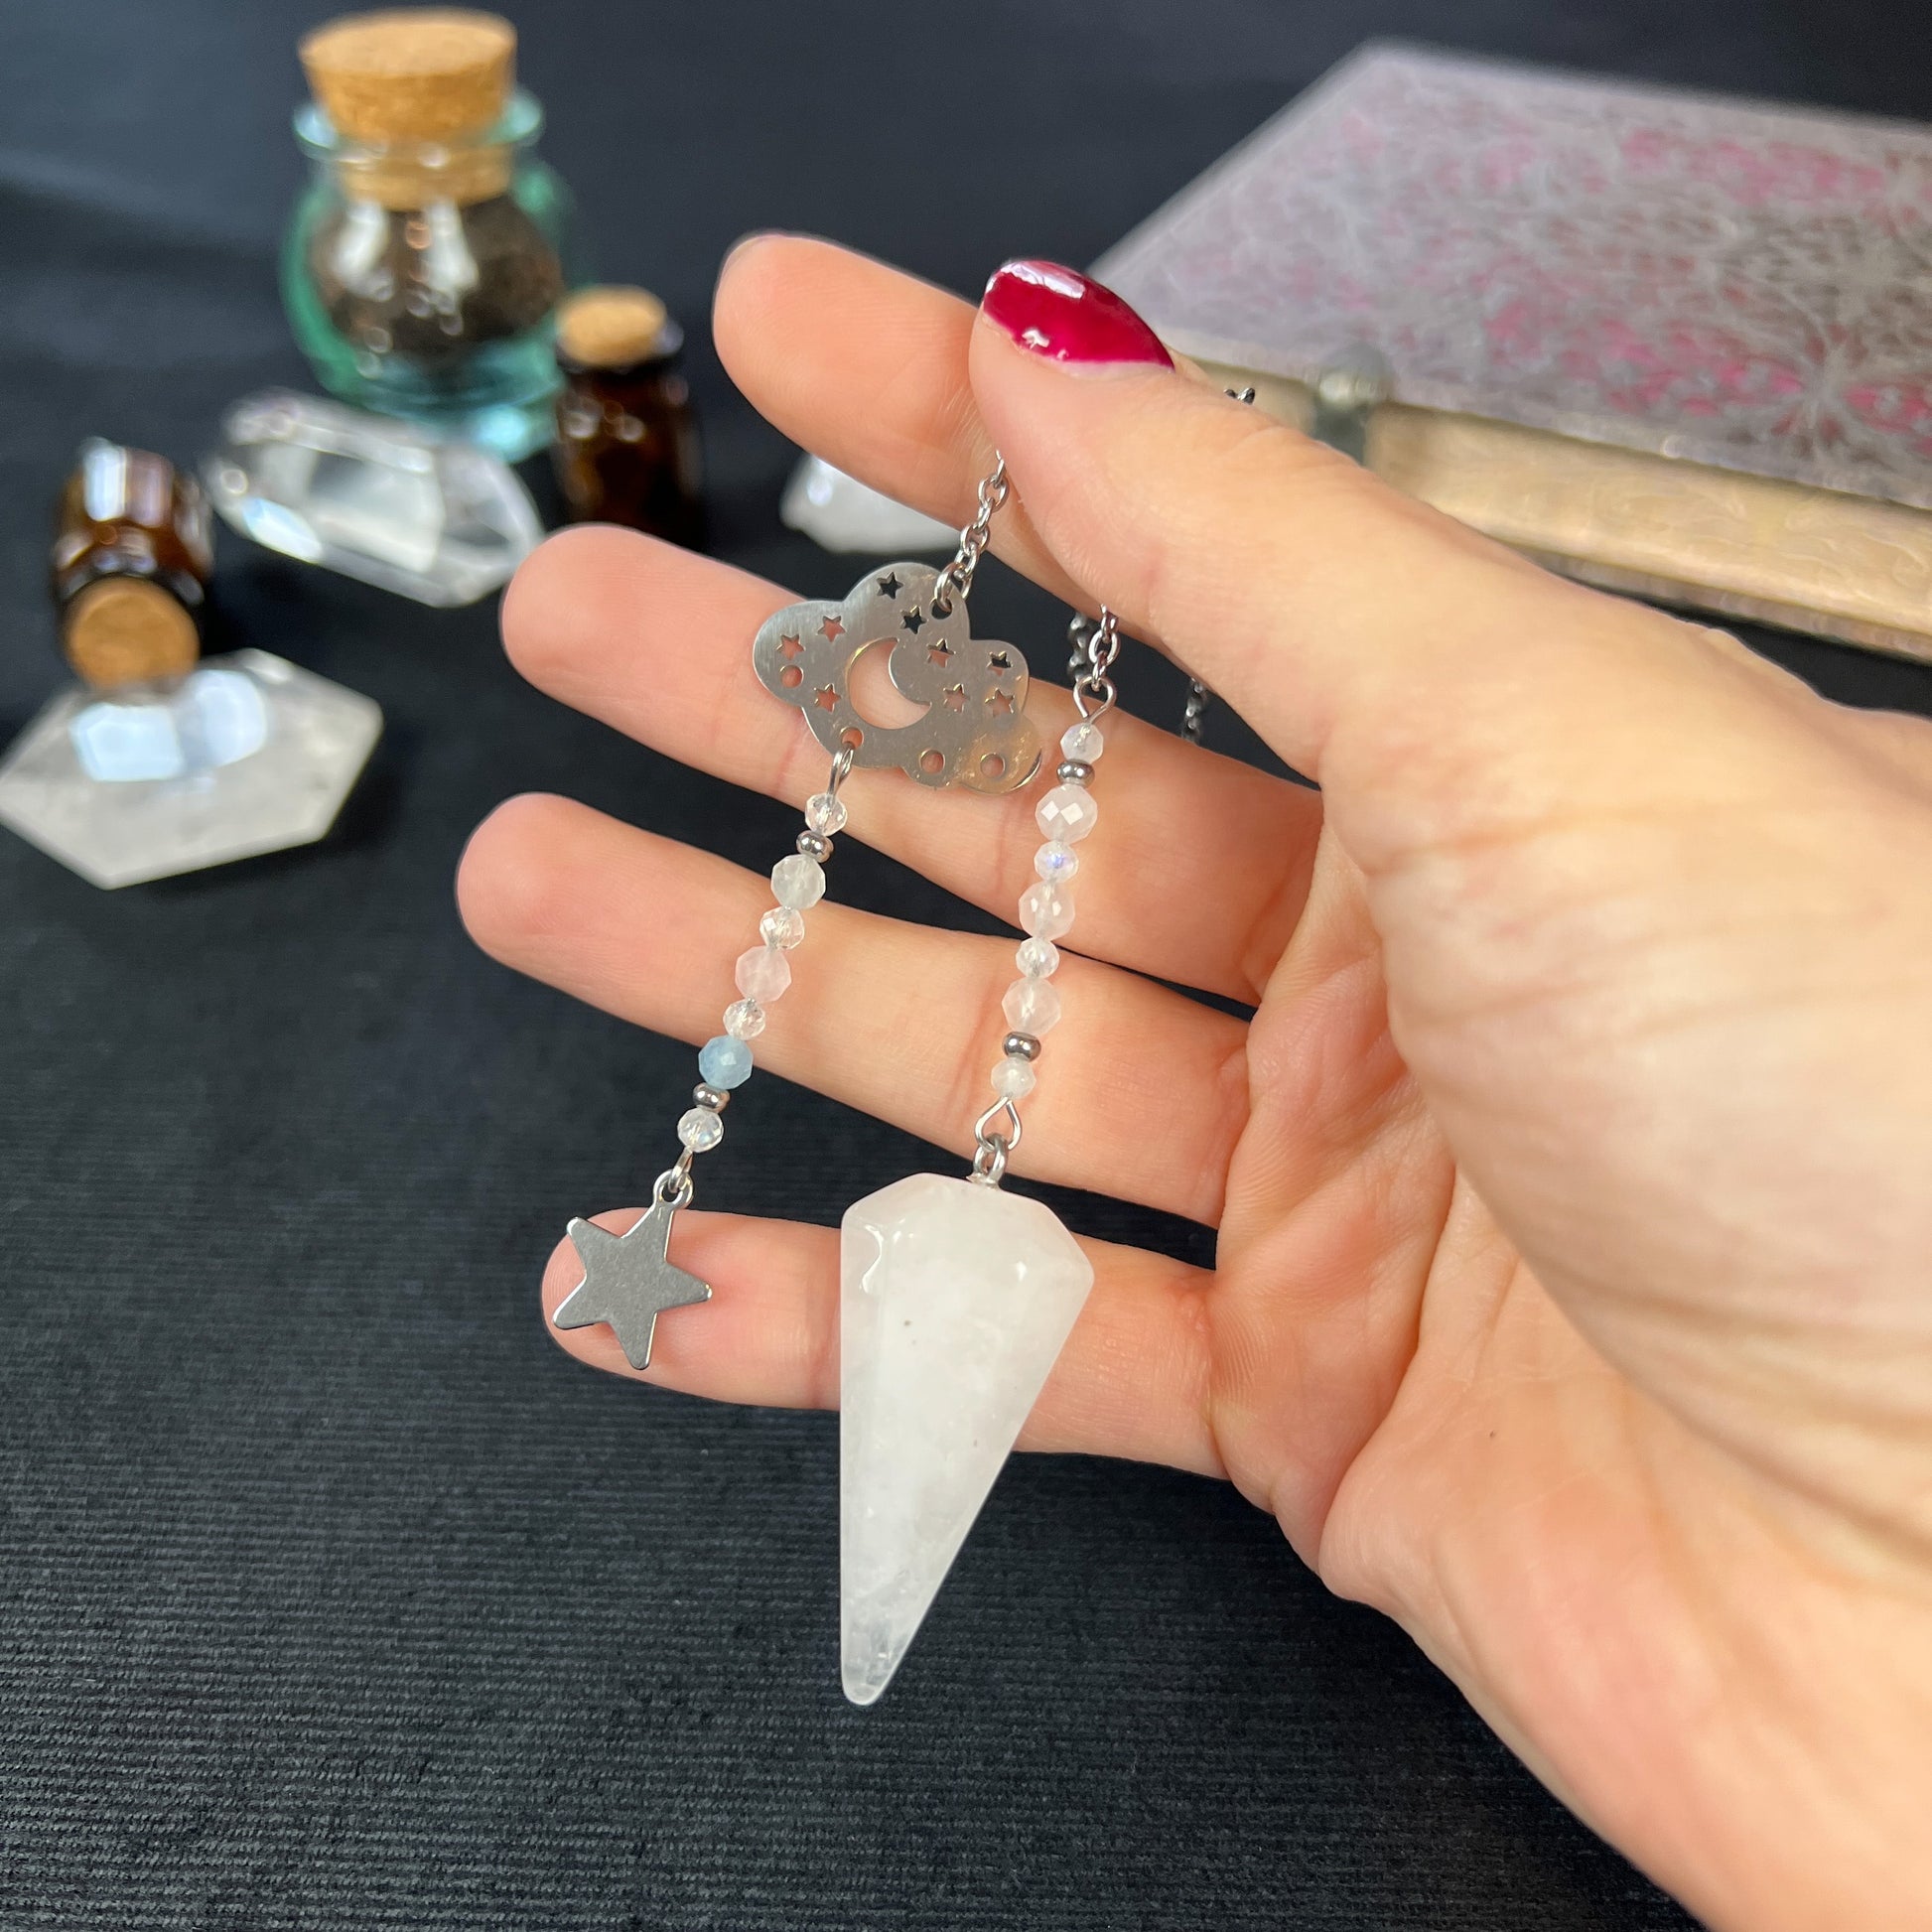 lovely pastel gemstone divination pendulum for dowsing star and cloud charms